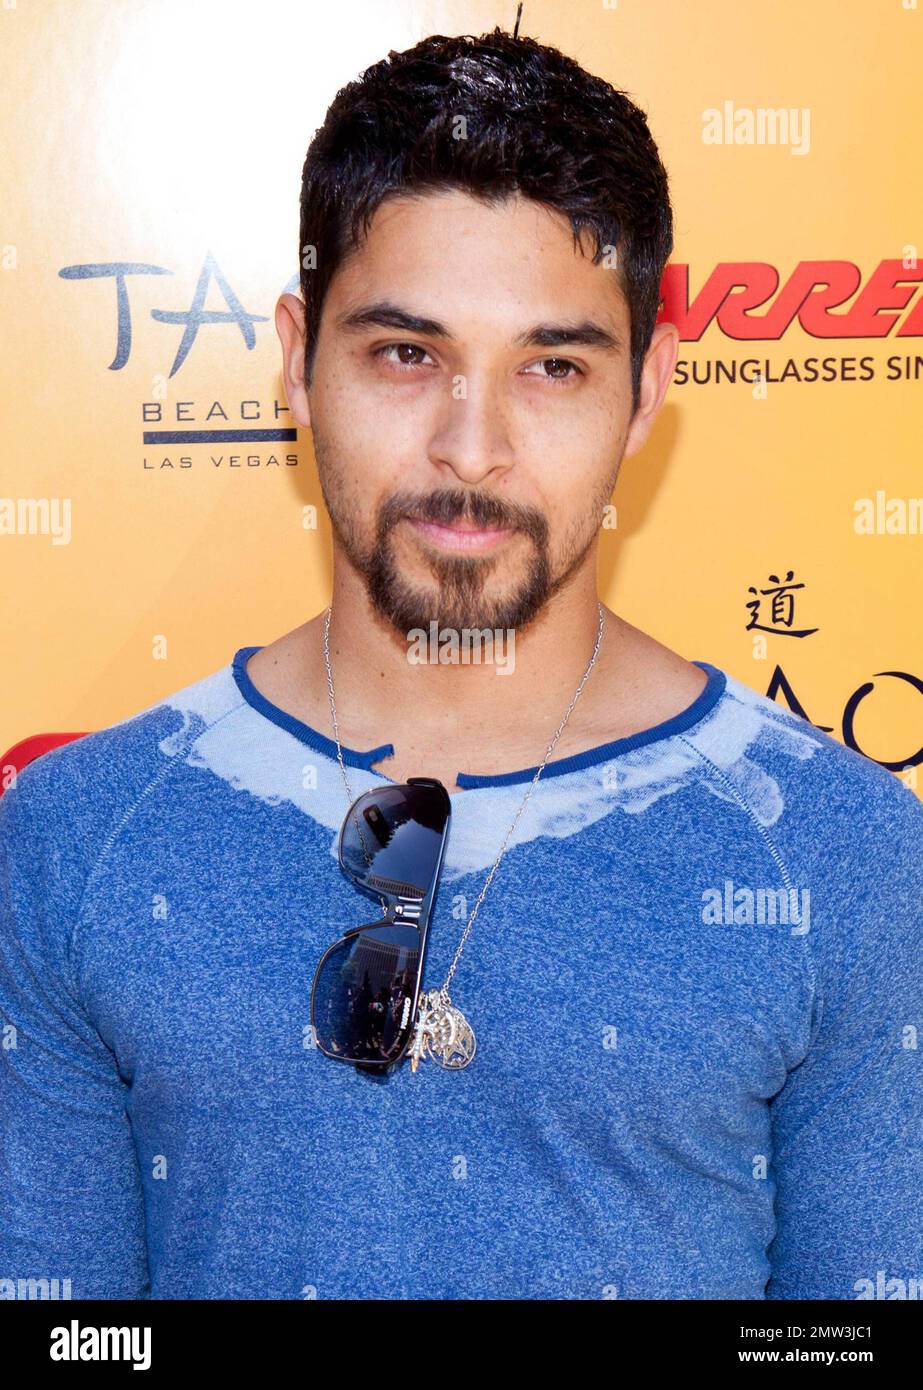 Wilmer Valderrama of 'That '70s Show' fame arrives at TAO Beach at the Venetian Resort Hotel and Casino to host a pool party. Valderrama, 30, who was once romantically linked to troubled actress Lindsay Lohan, is currently filming 'Larry Crowne' co-starring Tom Hanks and Julia Roberts. Las Vegas, NV. 05/22/10. Stock Photo